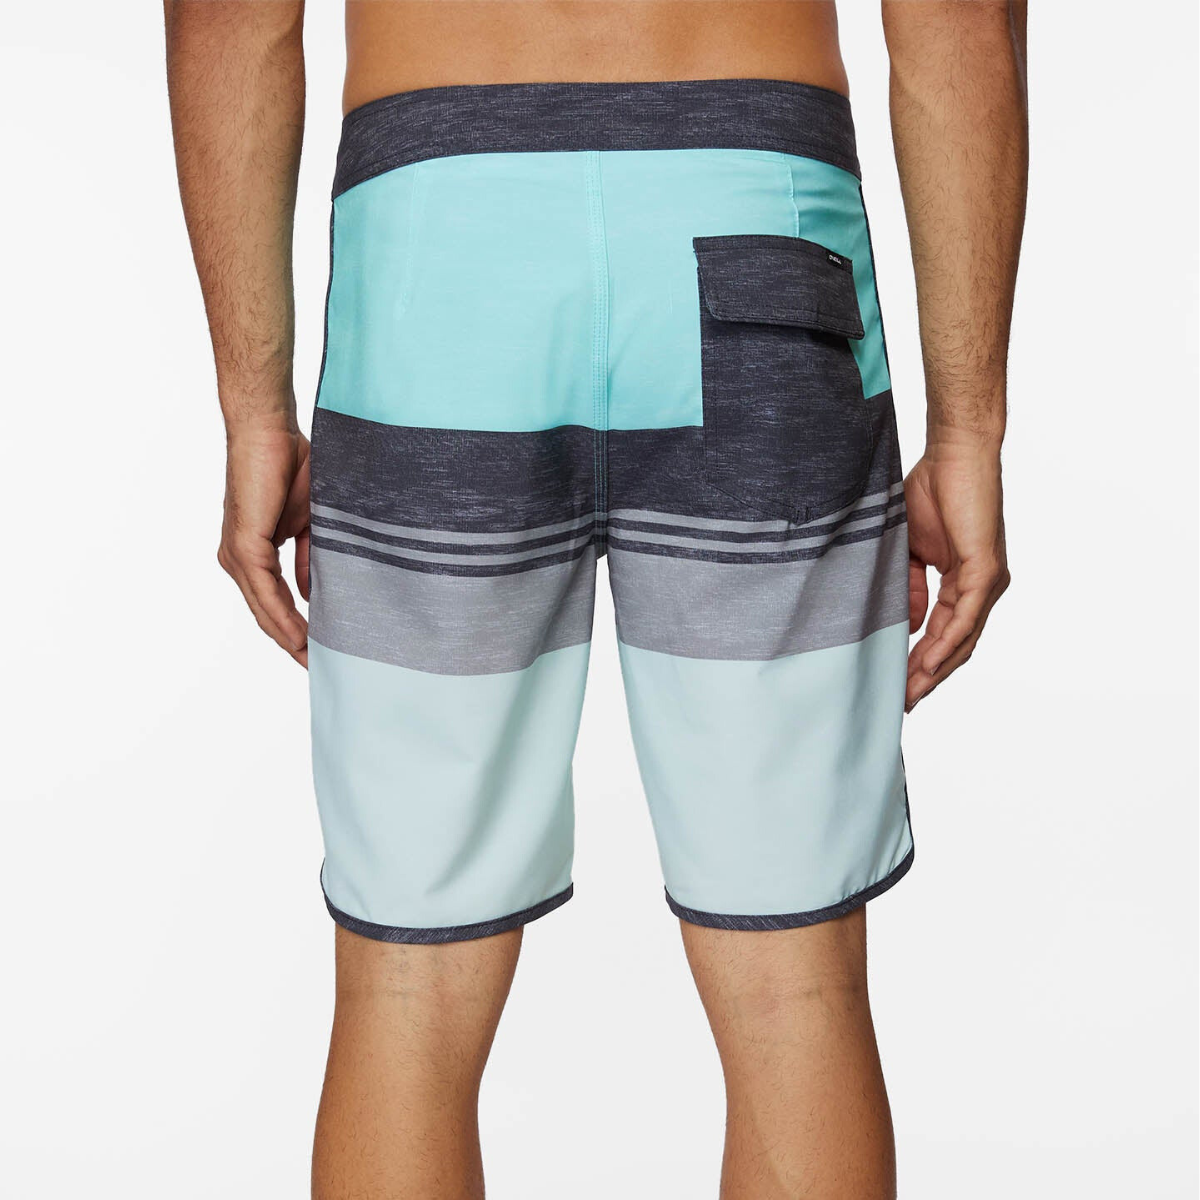 ROPA DE BAÑO HOMBRE - FOUR SQUARE STRETCH 19" - TURQUOISE - IN87